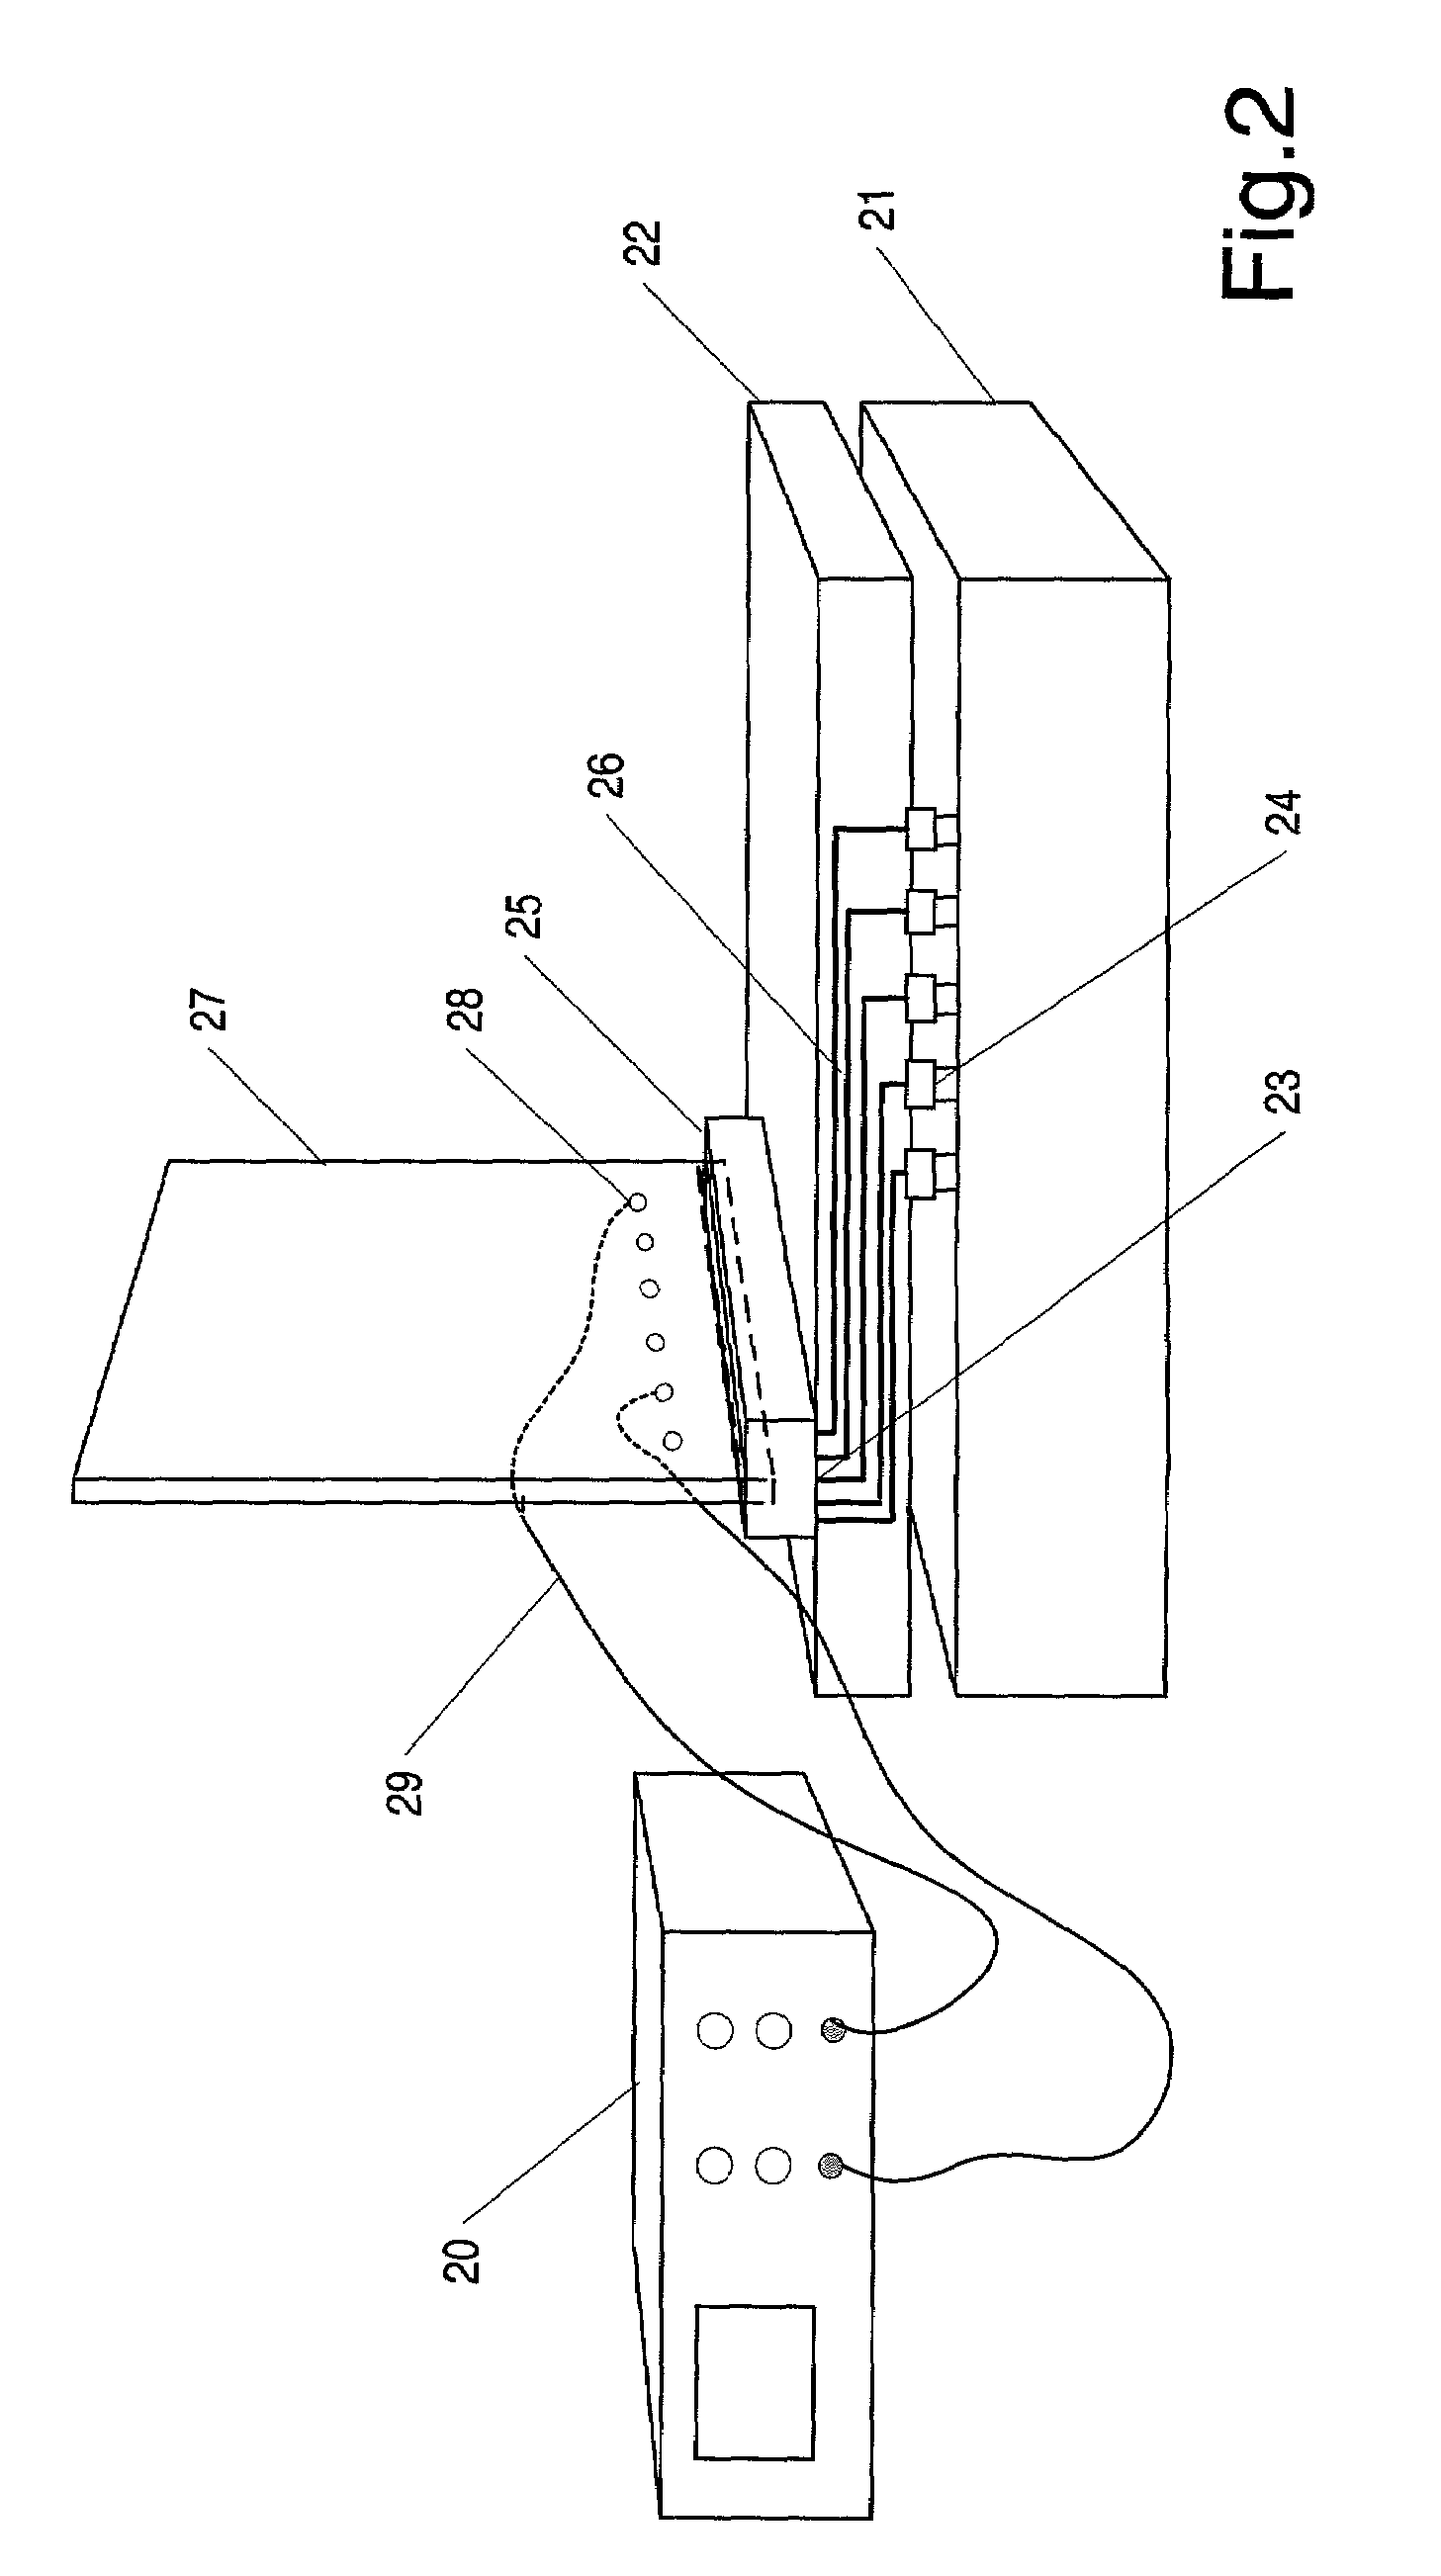 Interface device with stored data on transmission lines characteristics